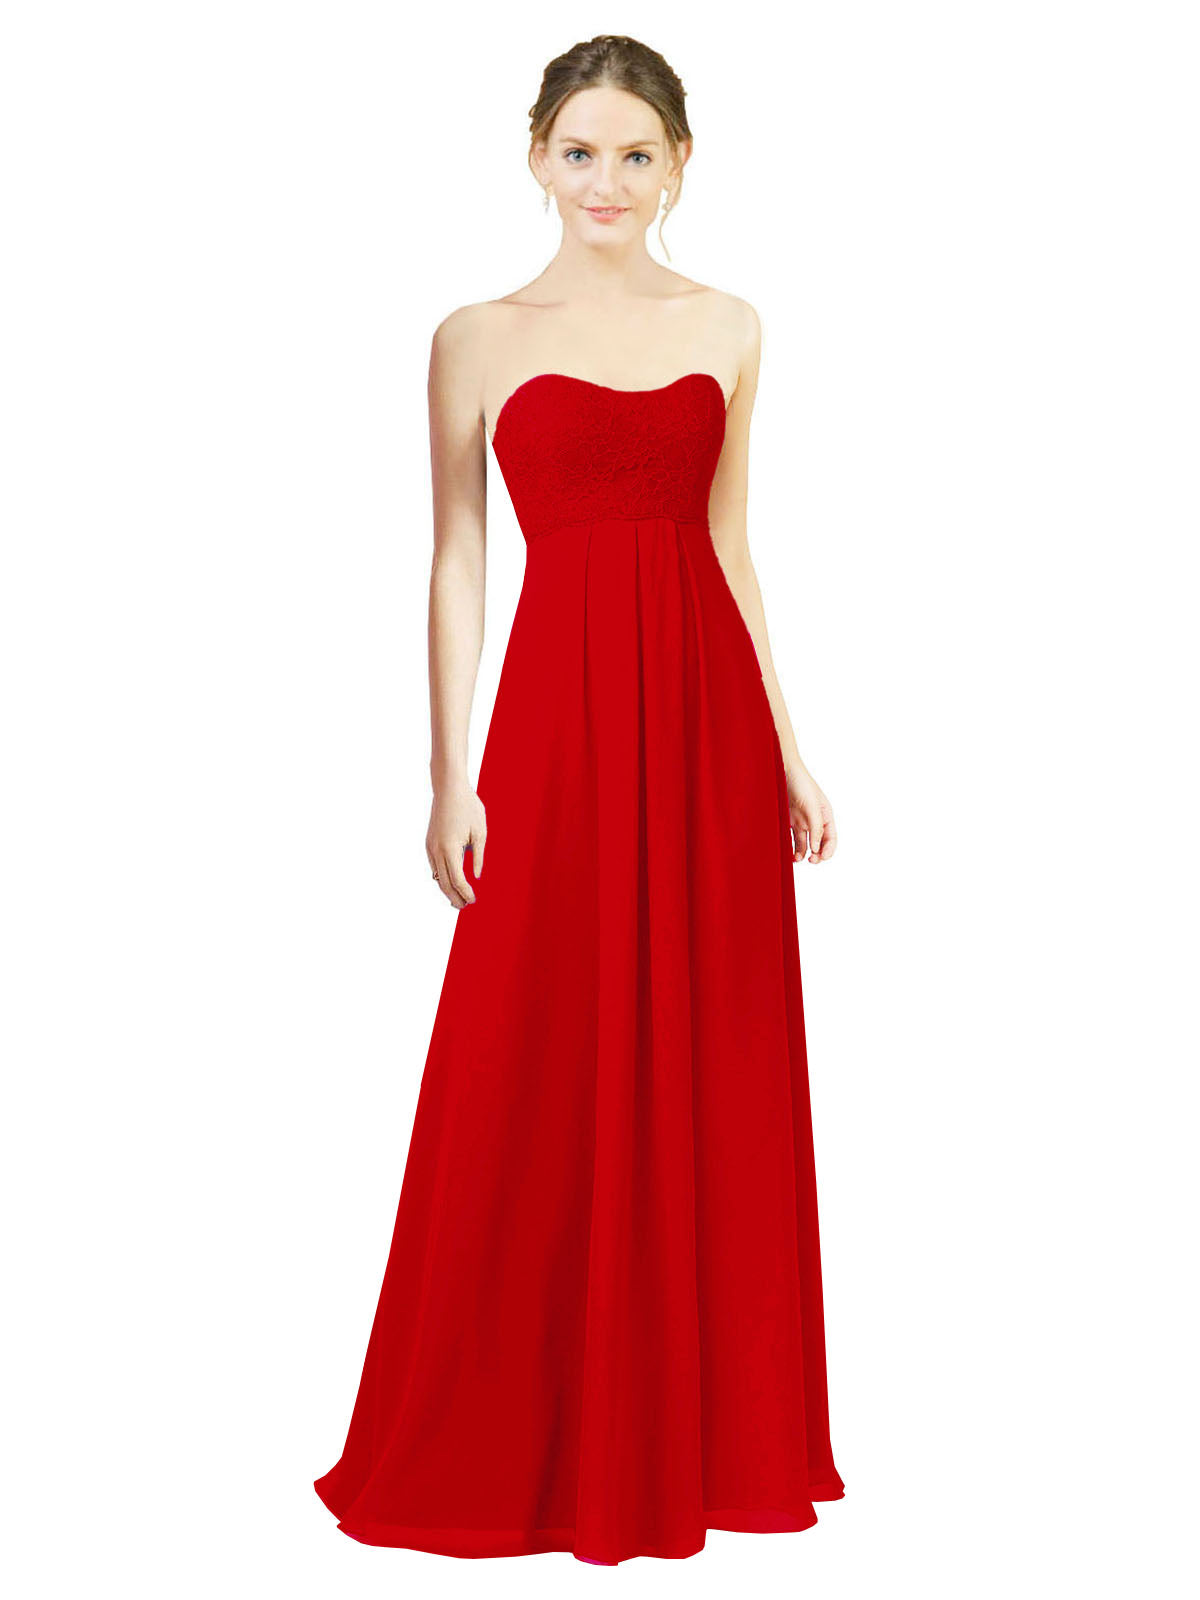 Dark Red A-Line Sweetheart Strapless Long Bridesmaid Dress Melany